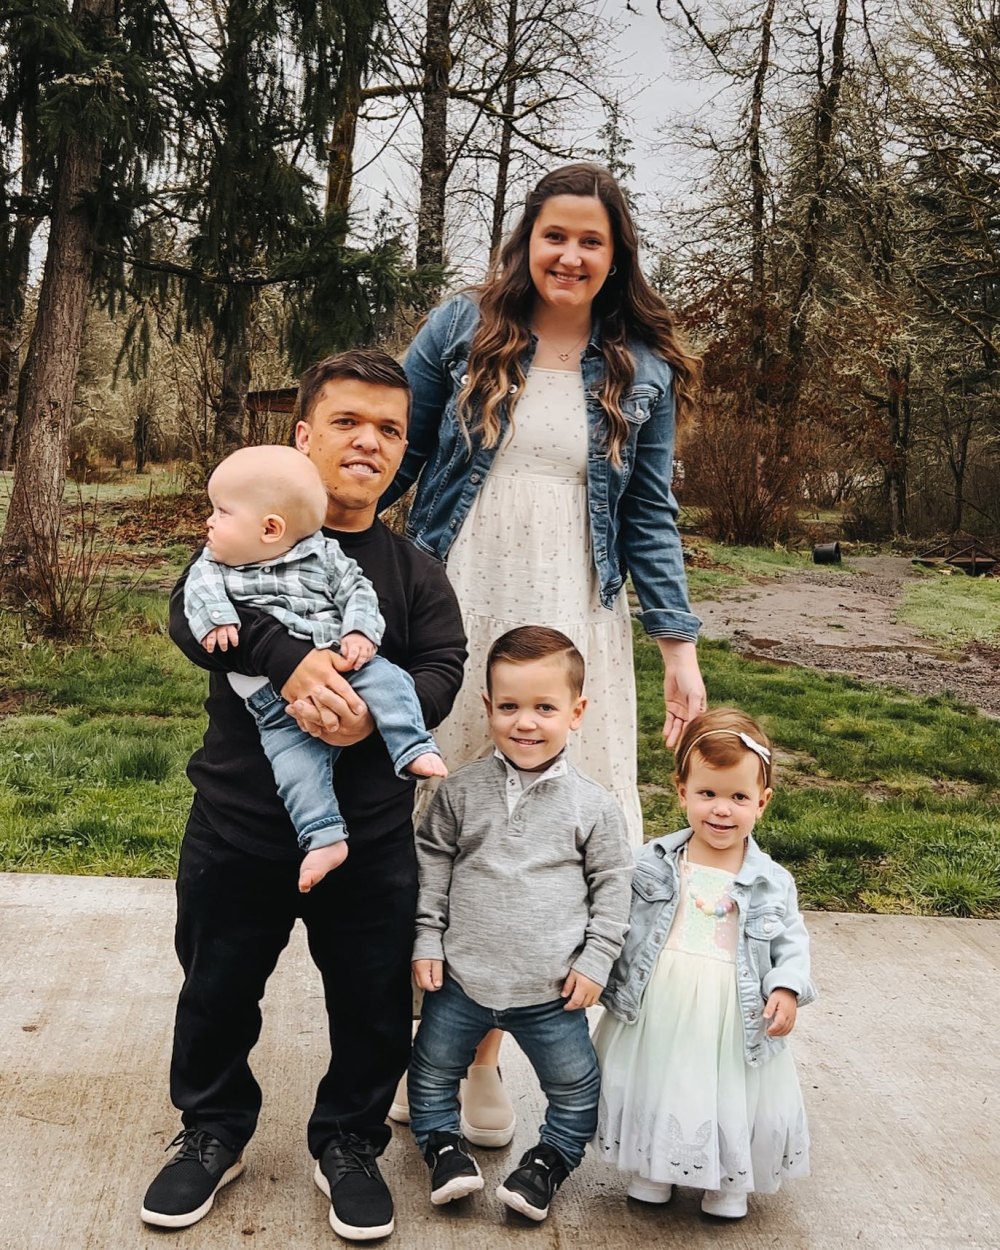 Zach and Tori Roloff Talk About the Possibilities of Homeschooling 3 Children Every Child Is Different